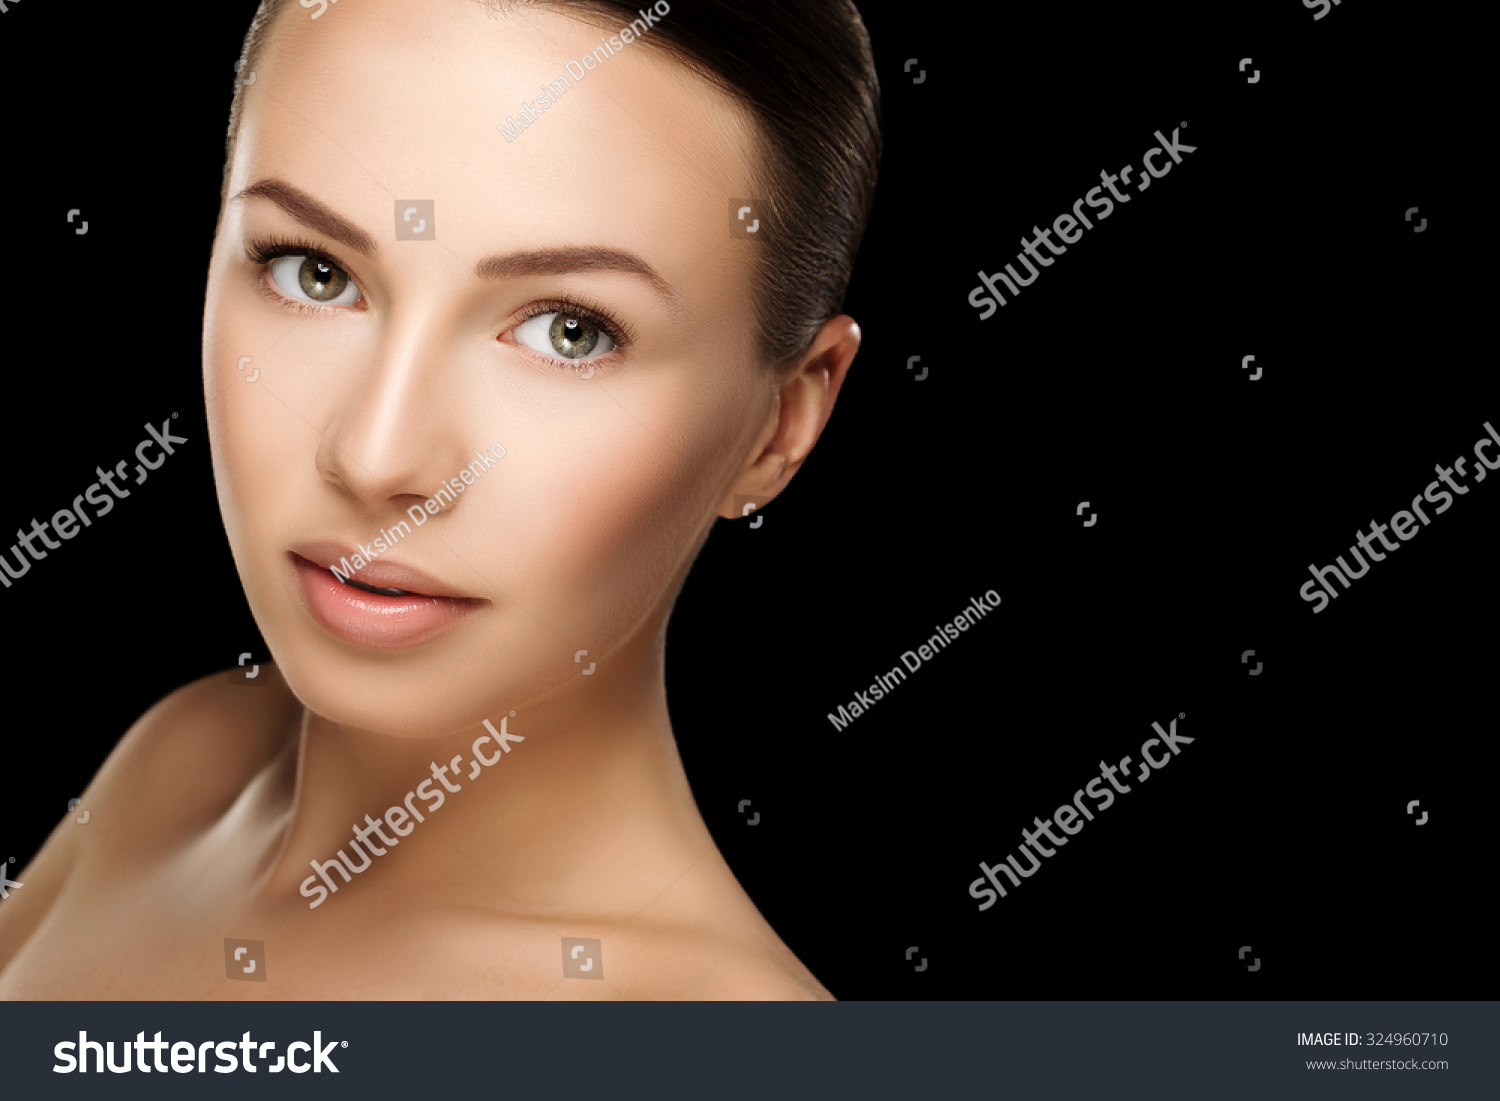 Beauty Portrait Of Sensual Model With No Makeup Clean Skin 